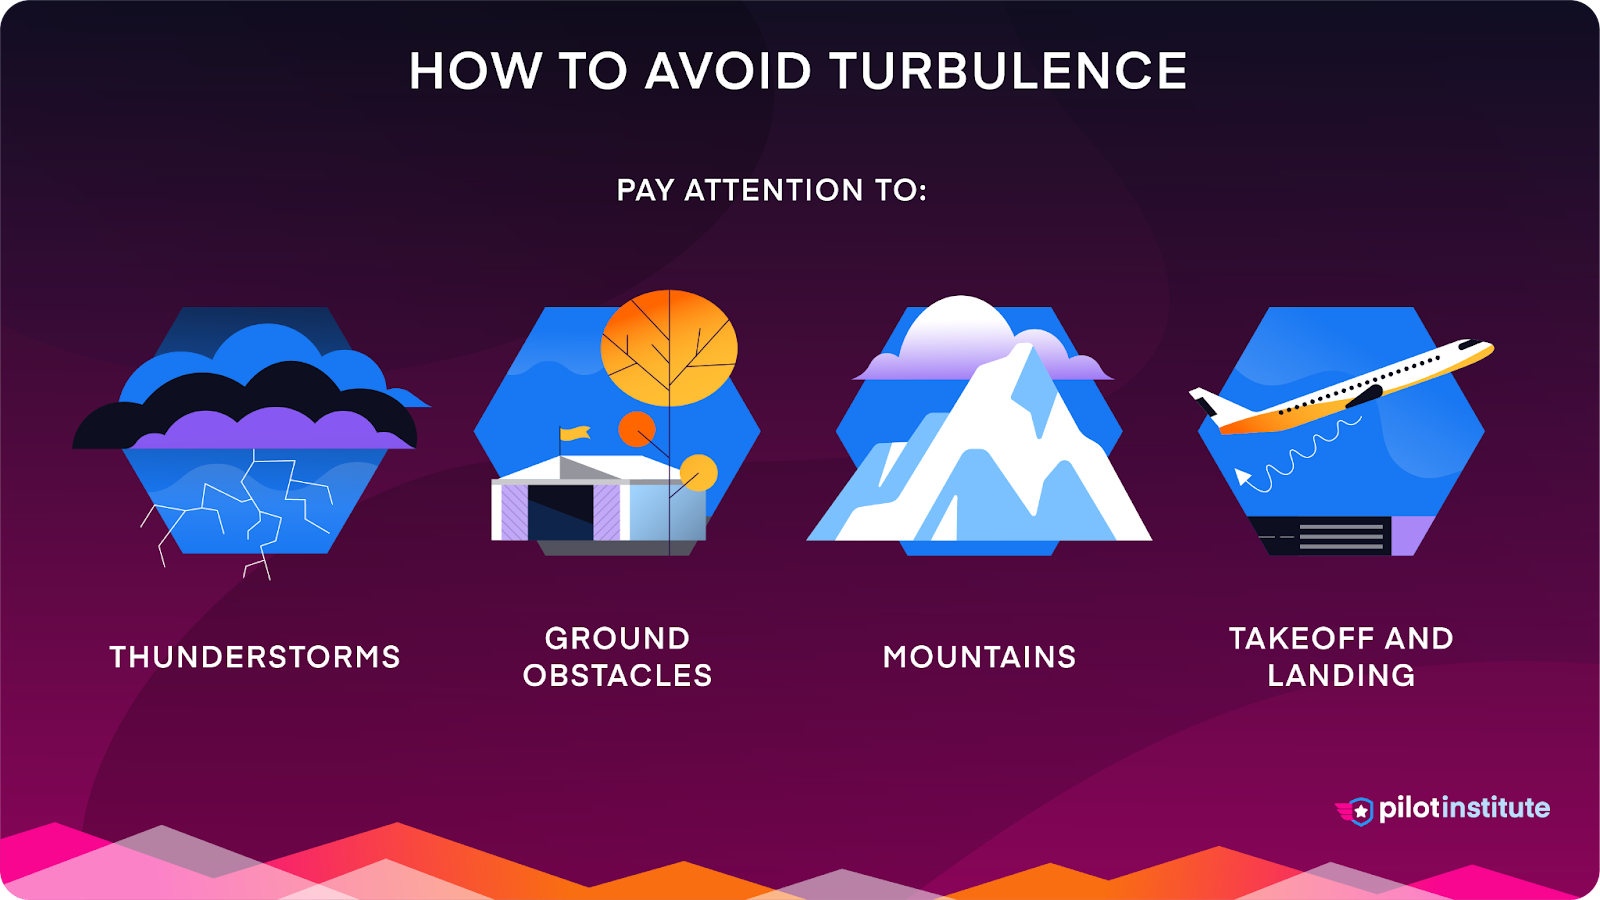 A diagram showing how to avoid turbulence.